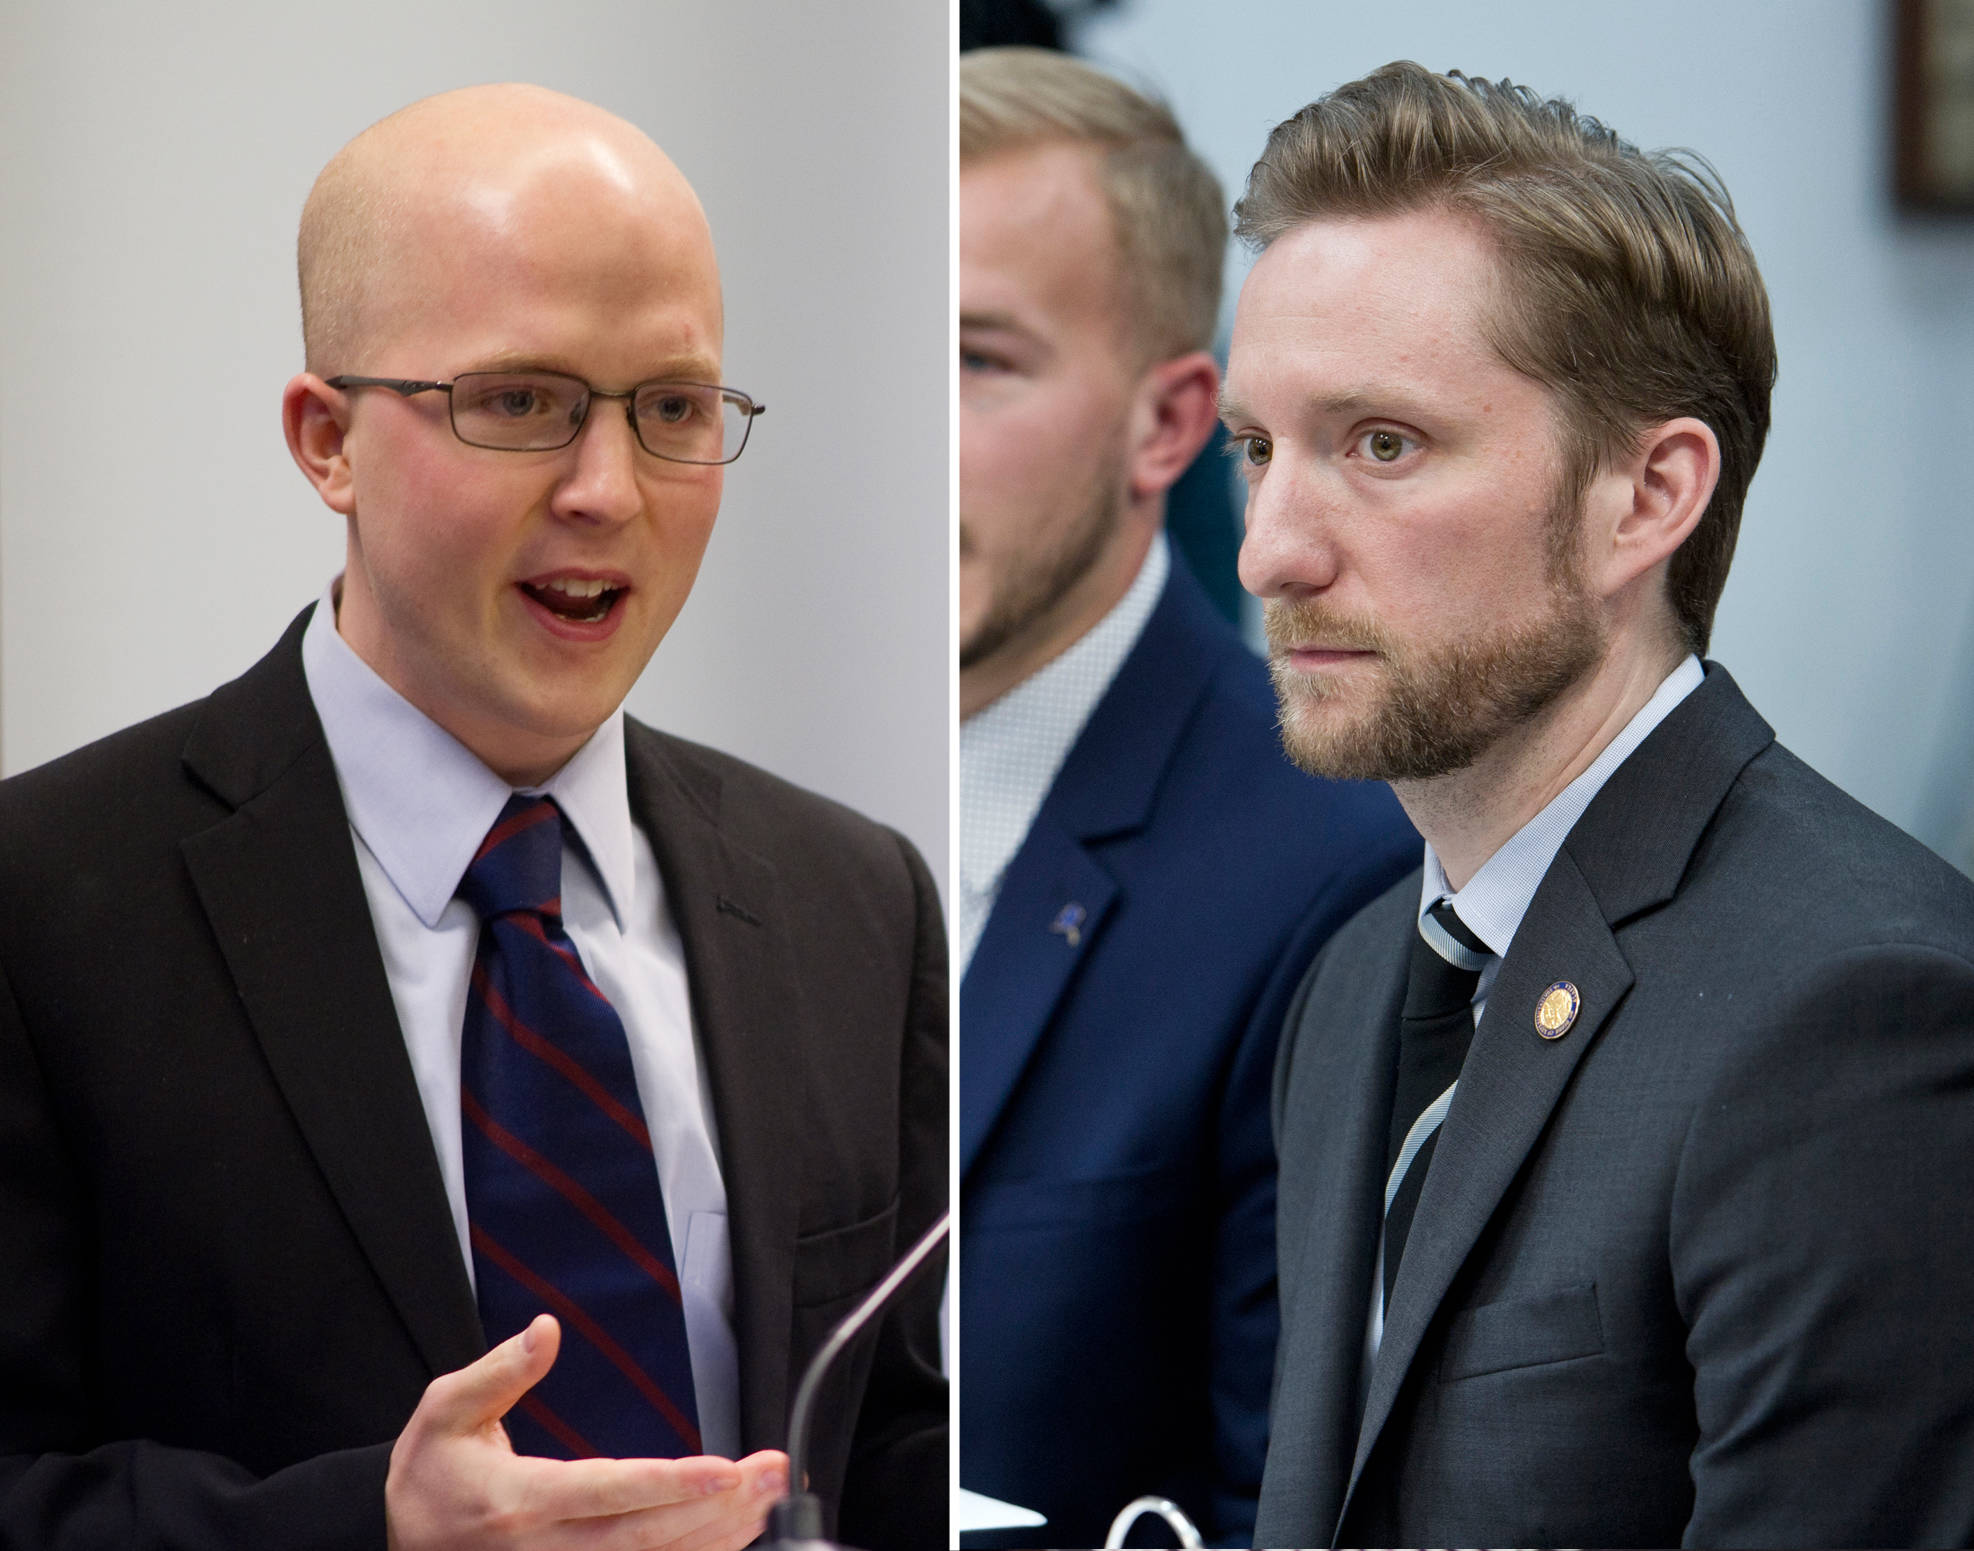 JUNEAU EMPIRE COMPOSITE  Rep. Jonathan Kreiss-Tomkins, D-Sitka, left, and Rep. Jason Grenn, I-Anchorage, right, are two of the three co-chairs (with Bonnie Jack of Anchorage) of a new ballot initiative that targets legislative prerogatives.